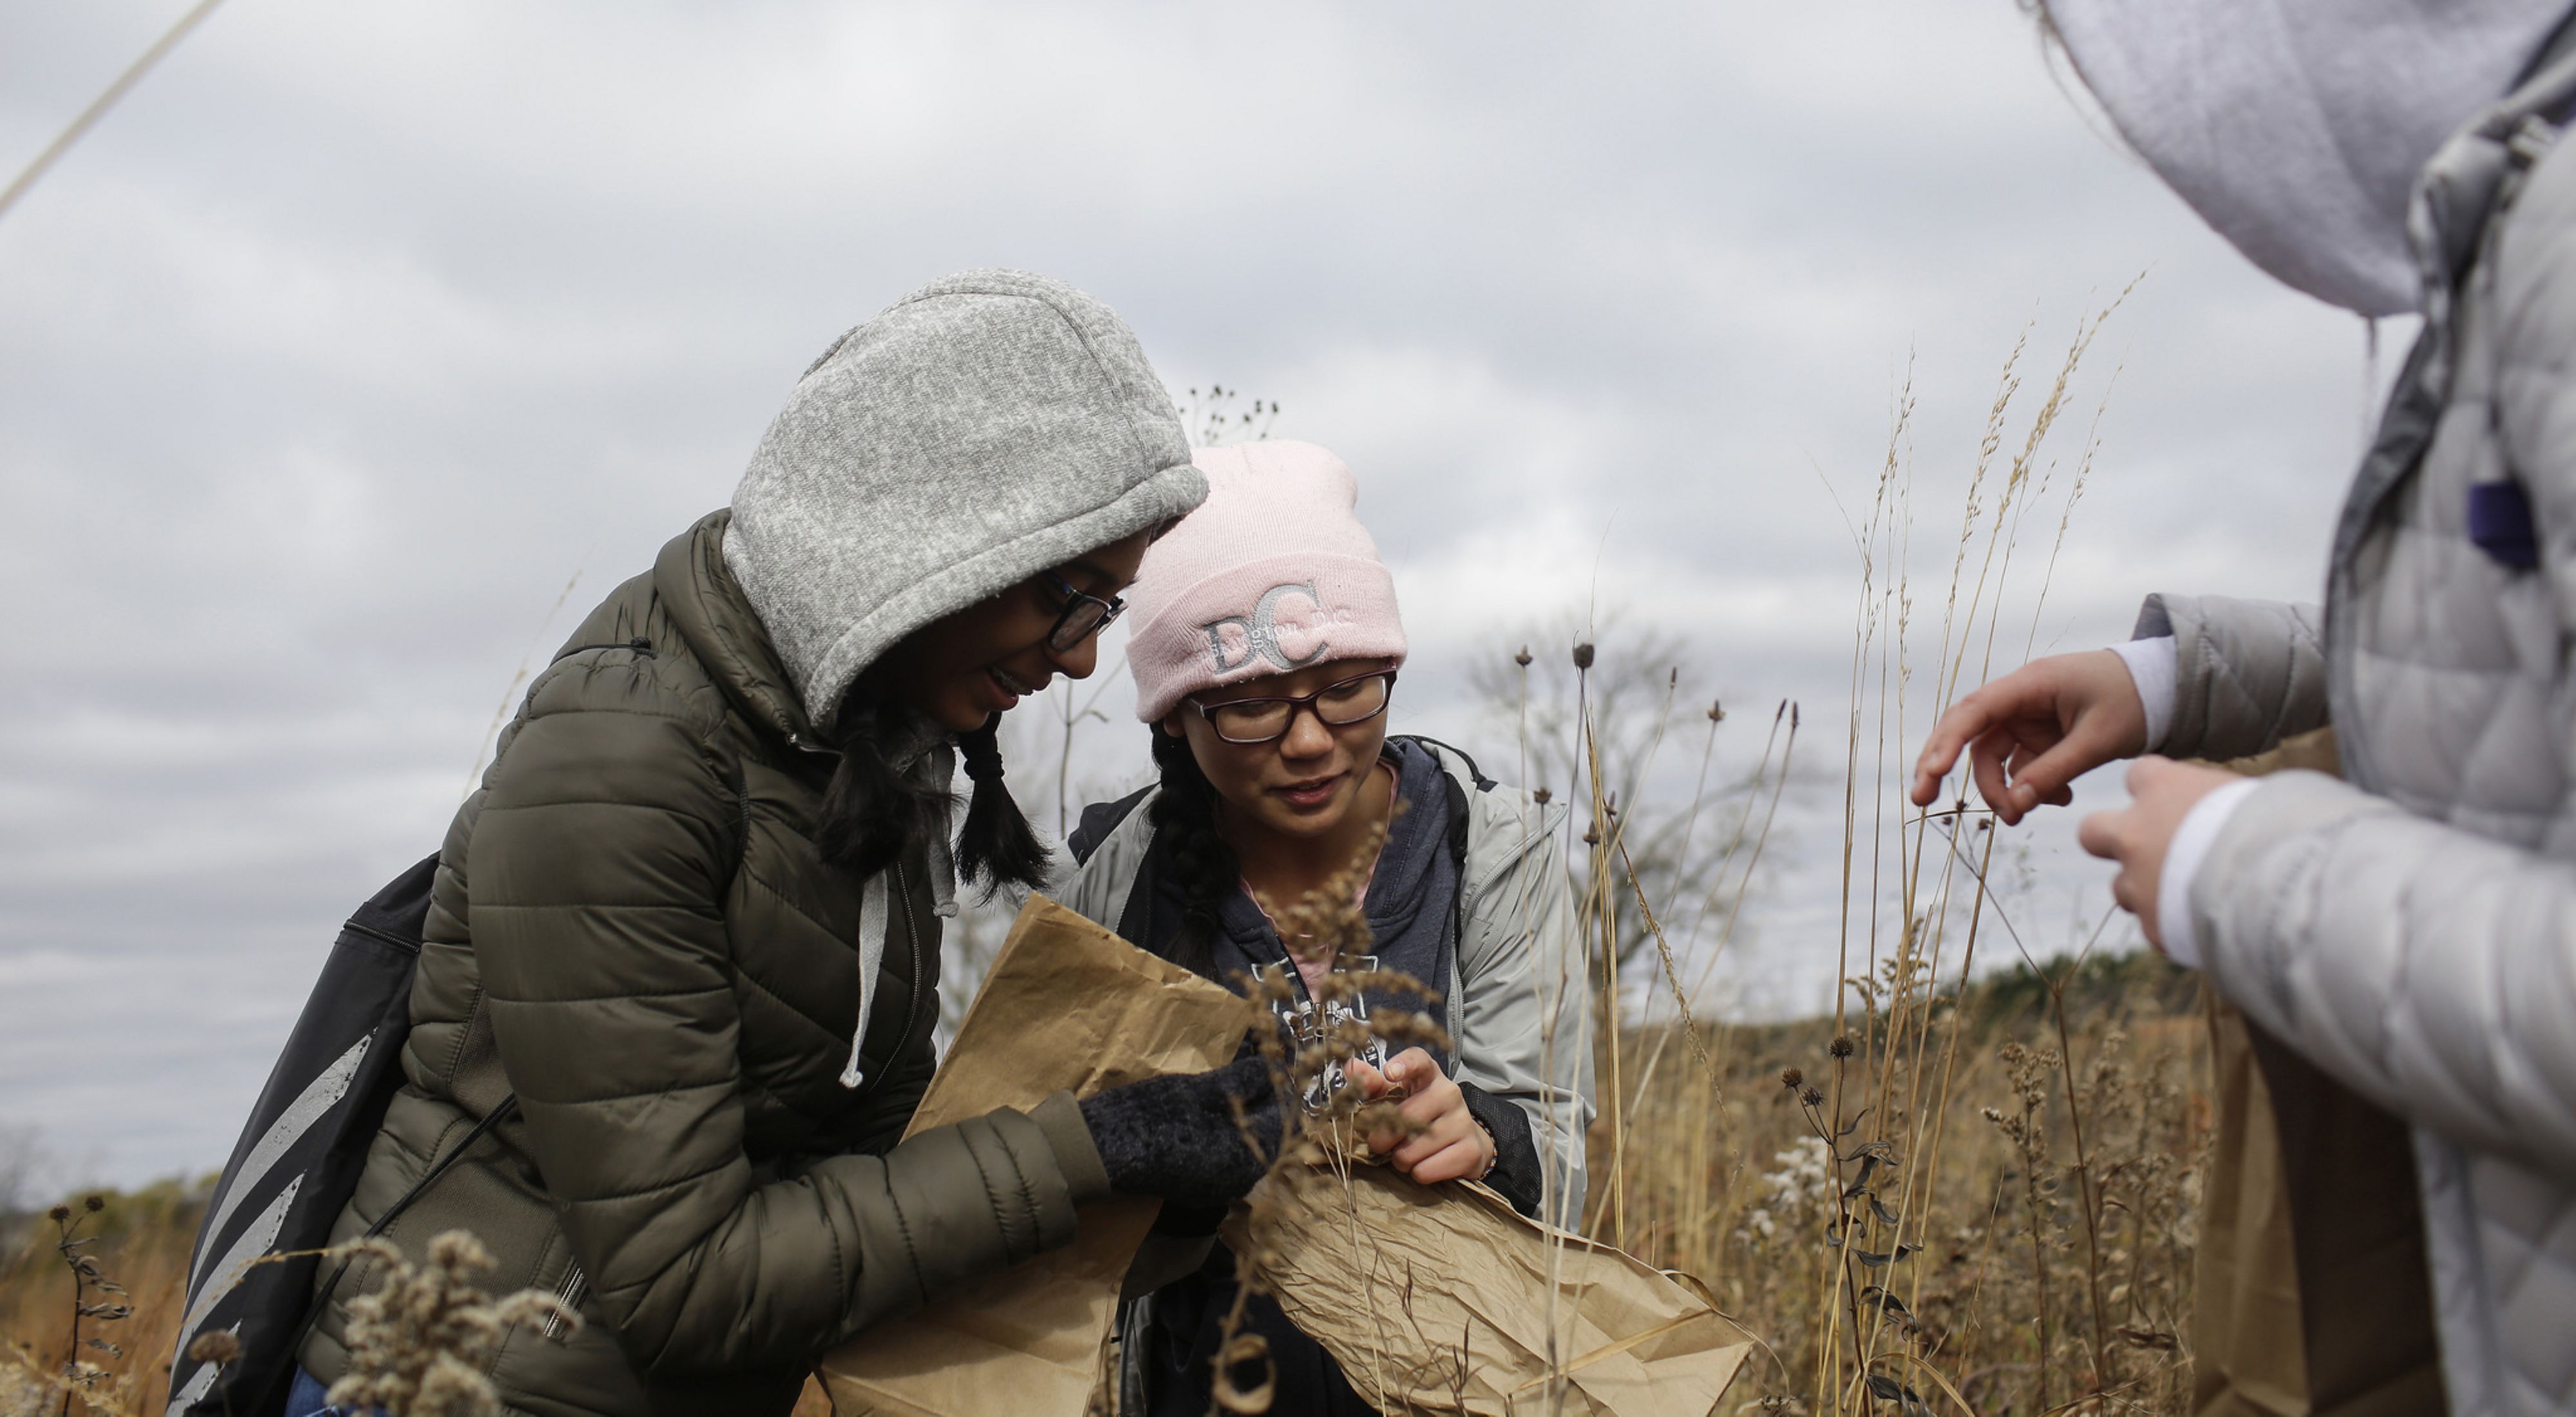 Three volunteers examine and collect seeds in a grassland.